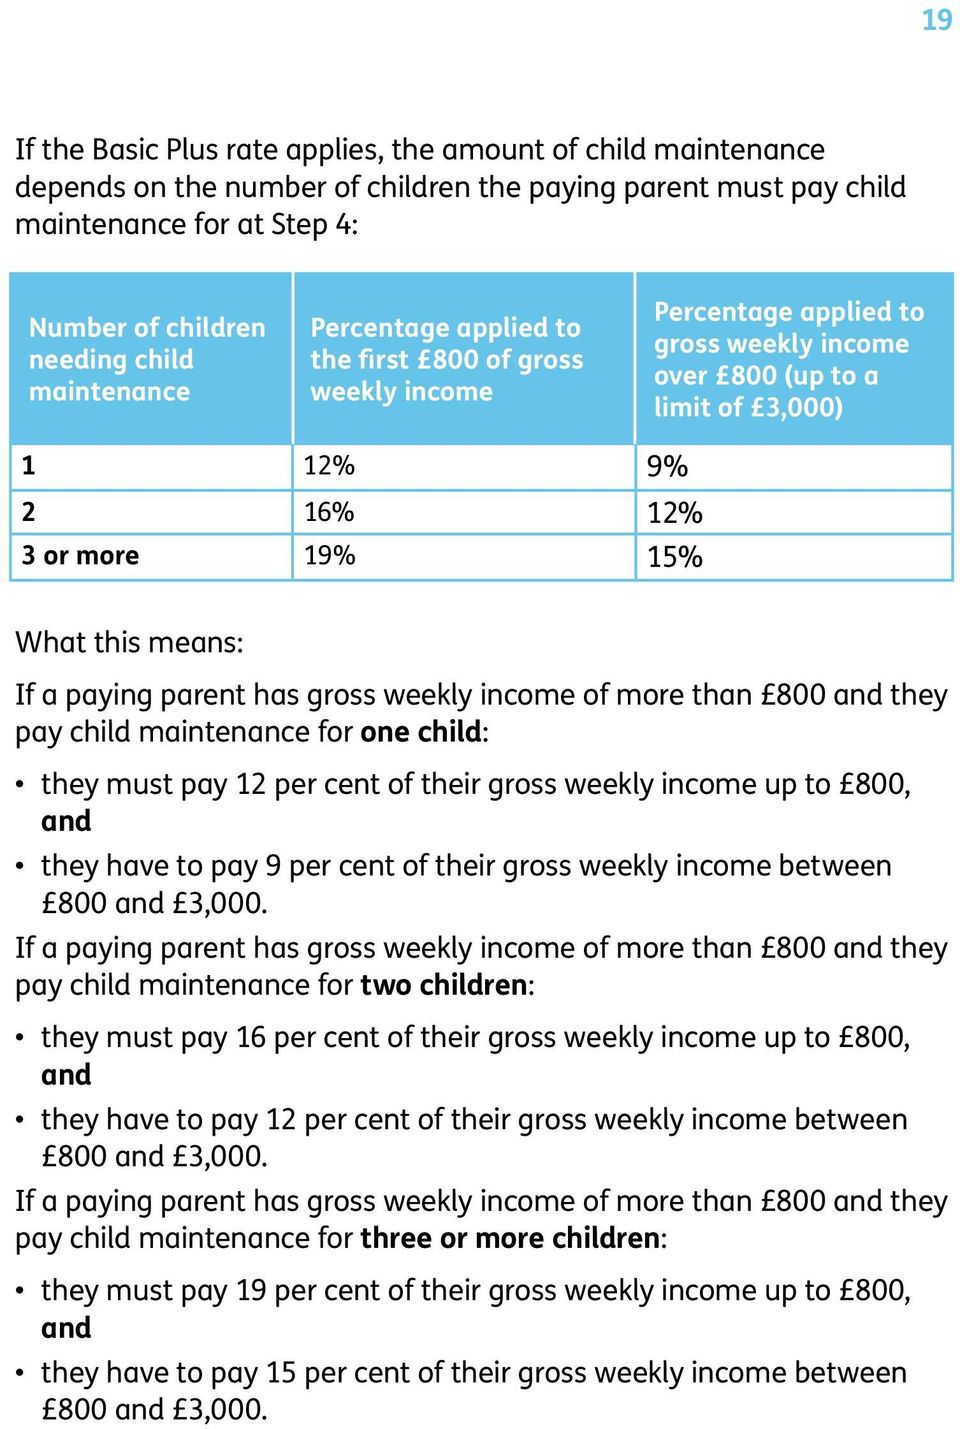 means: If a paying parent has gross weekly income of more than 800 and they pay child maintenance for one child: they must pay 12 per cent of their gross weekly income up to 800, and they have to pay